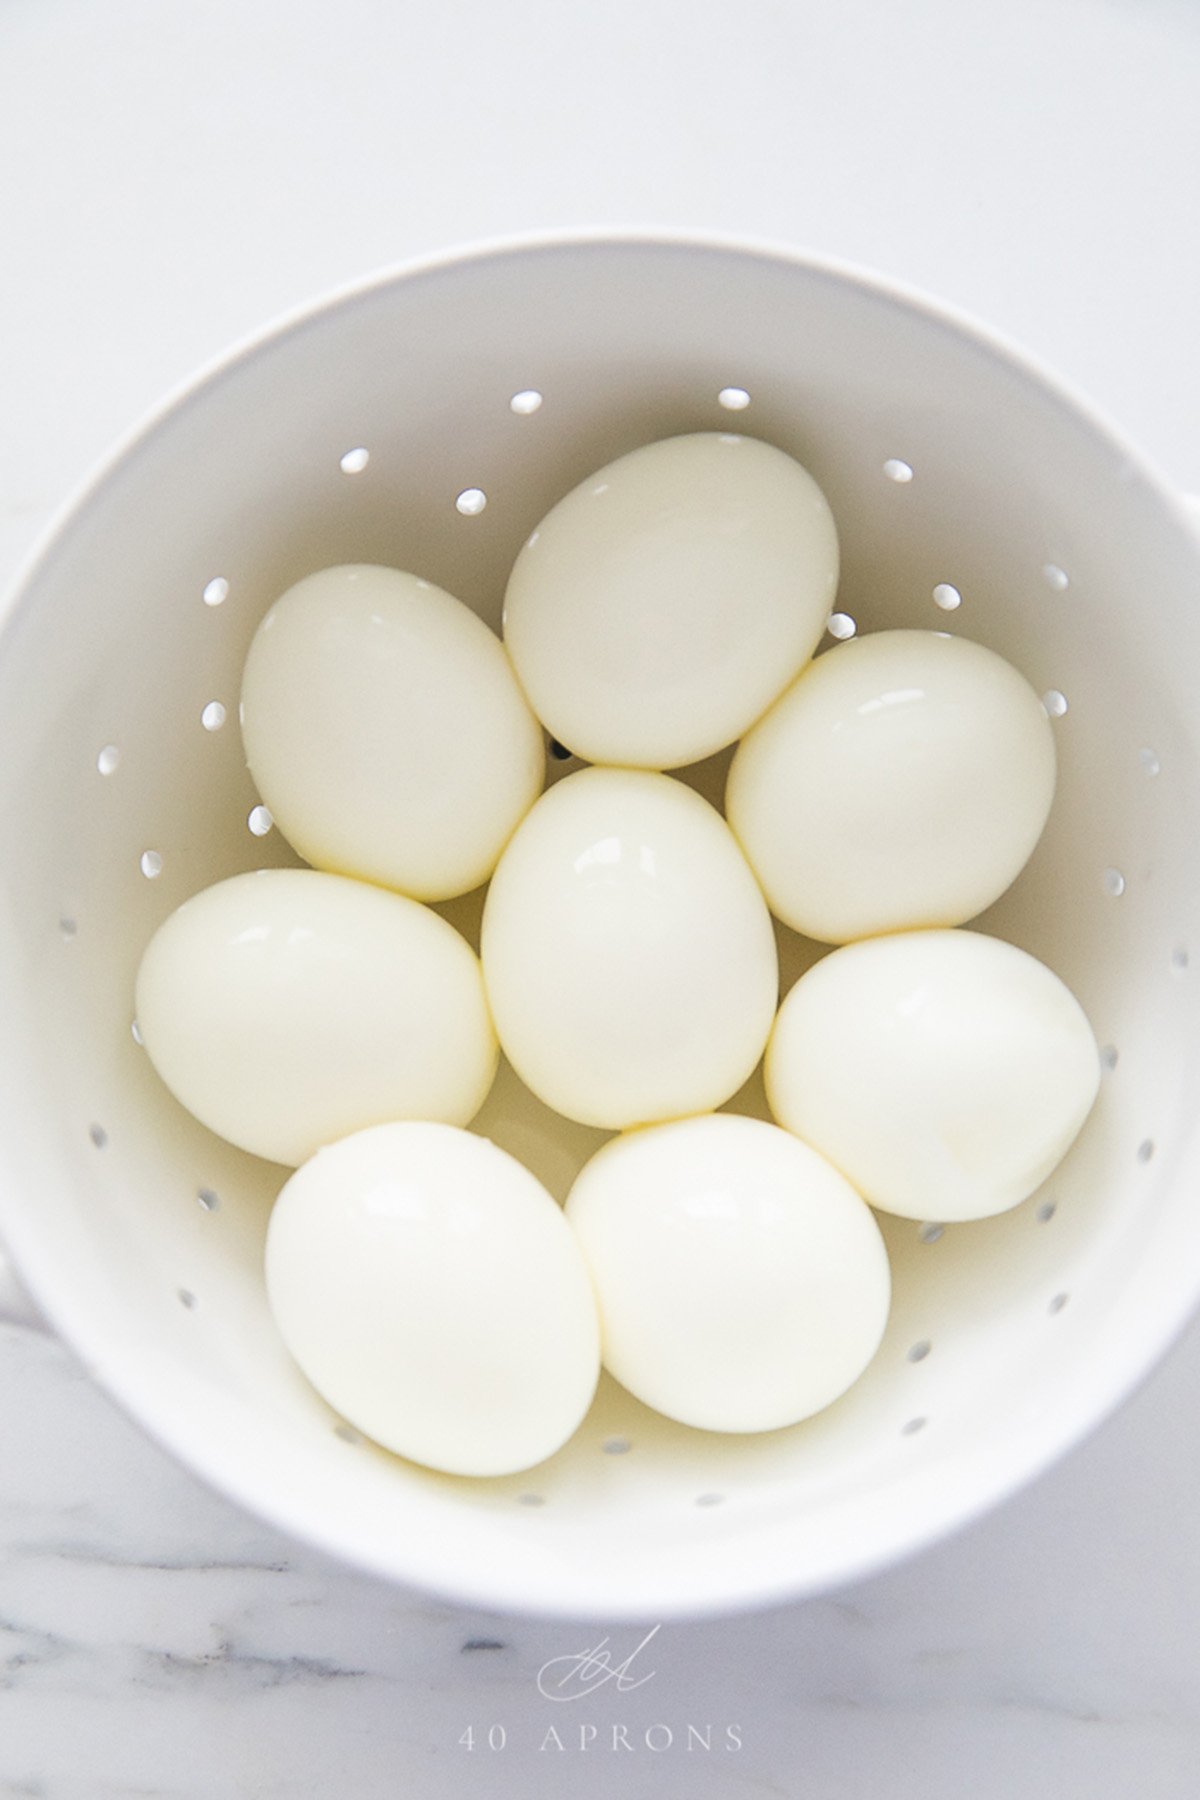 A bowl of perfect peeled soft and hard boiled eggs.